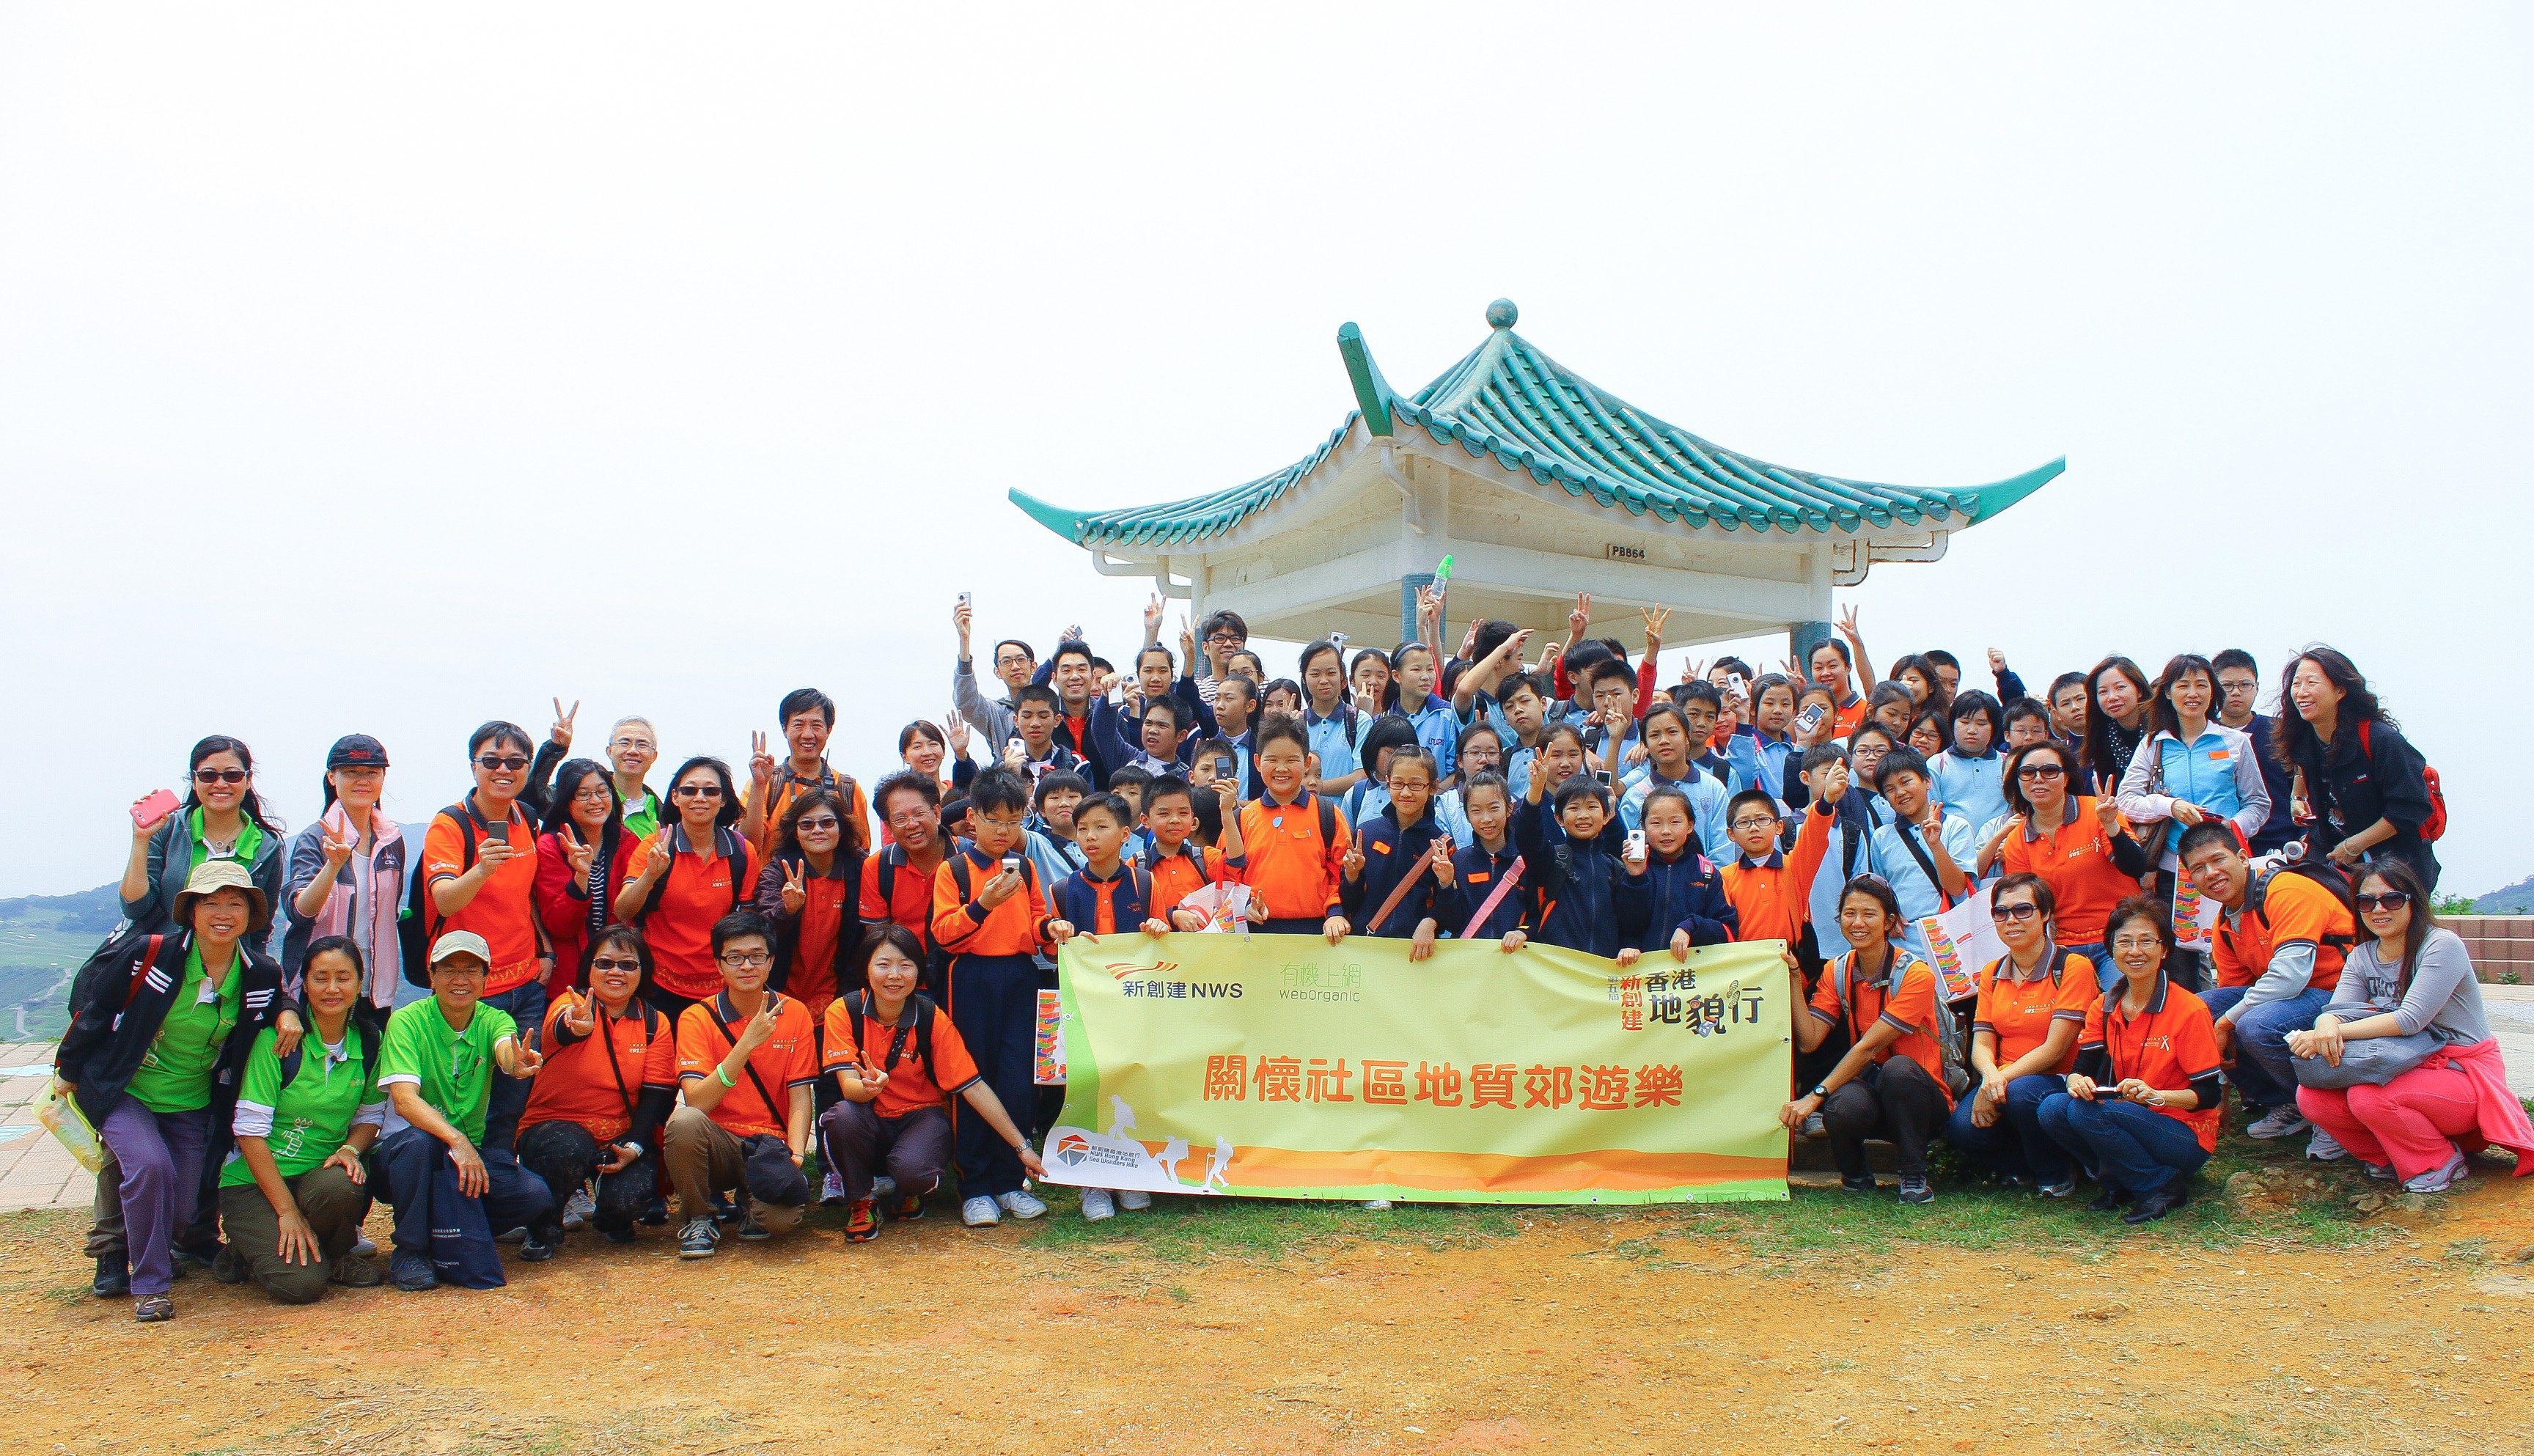 NWS Holdings and WebOrganic organise Geopark field trip with IT elements for underprivileged children (Chinese version only)